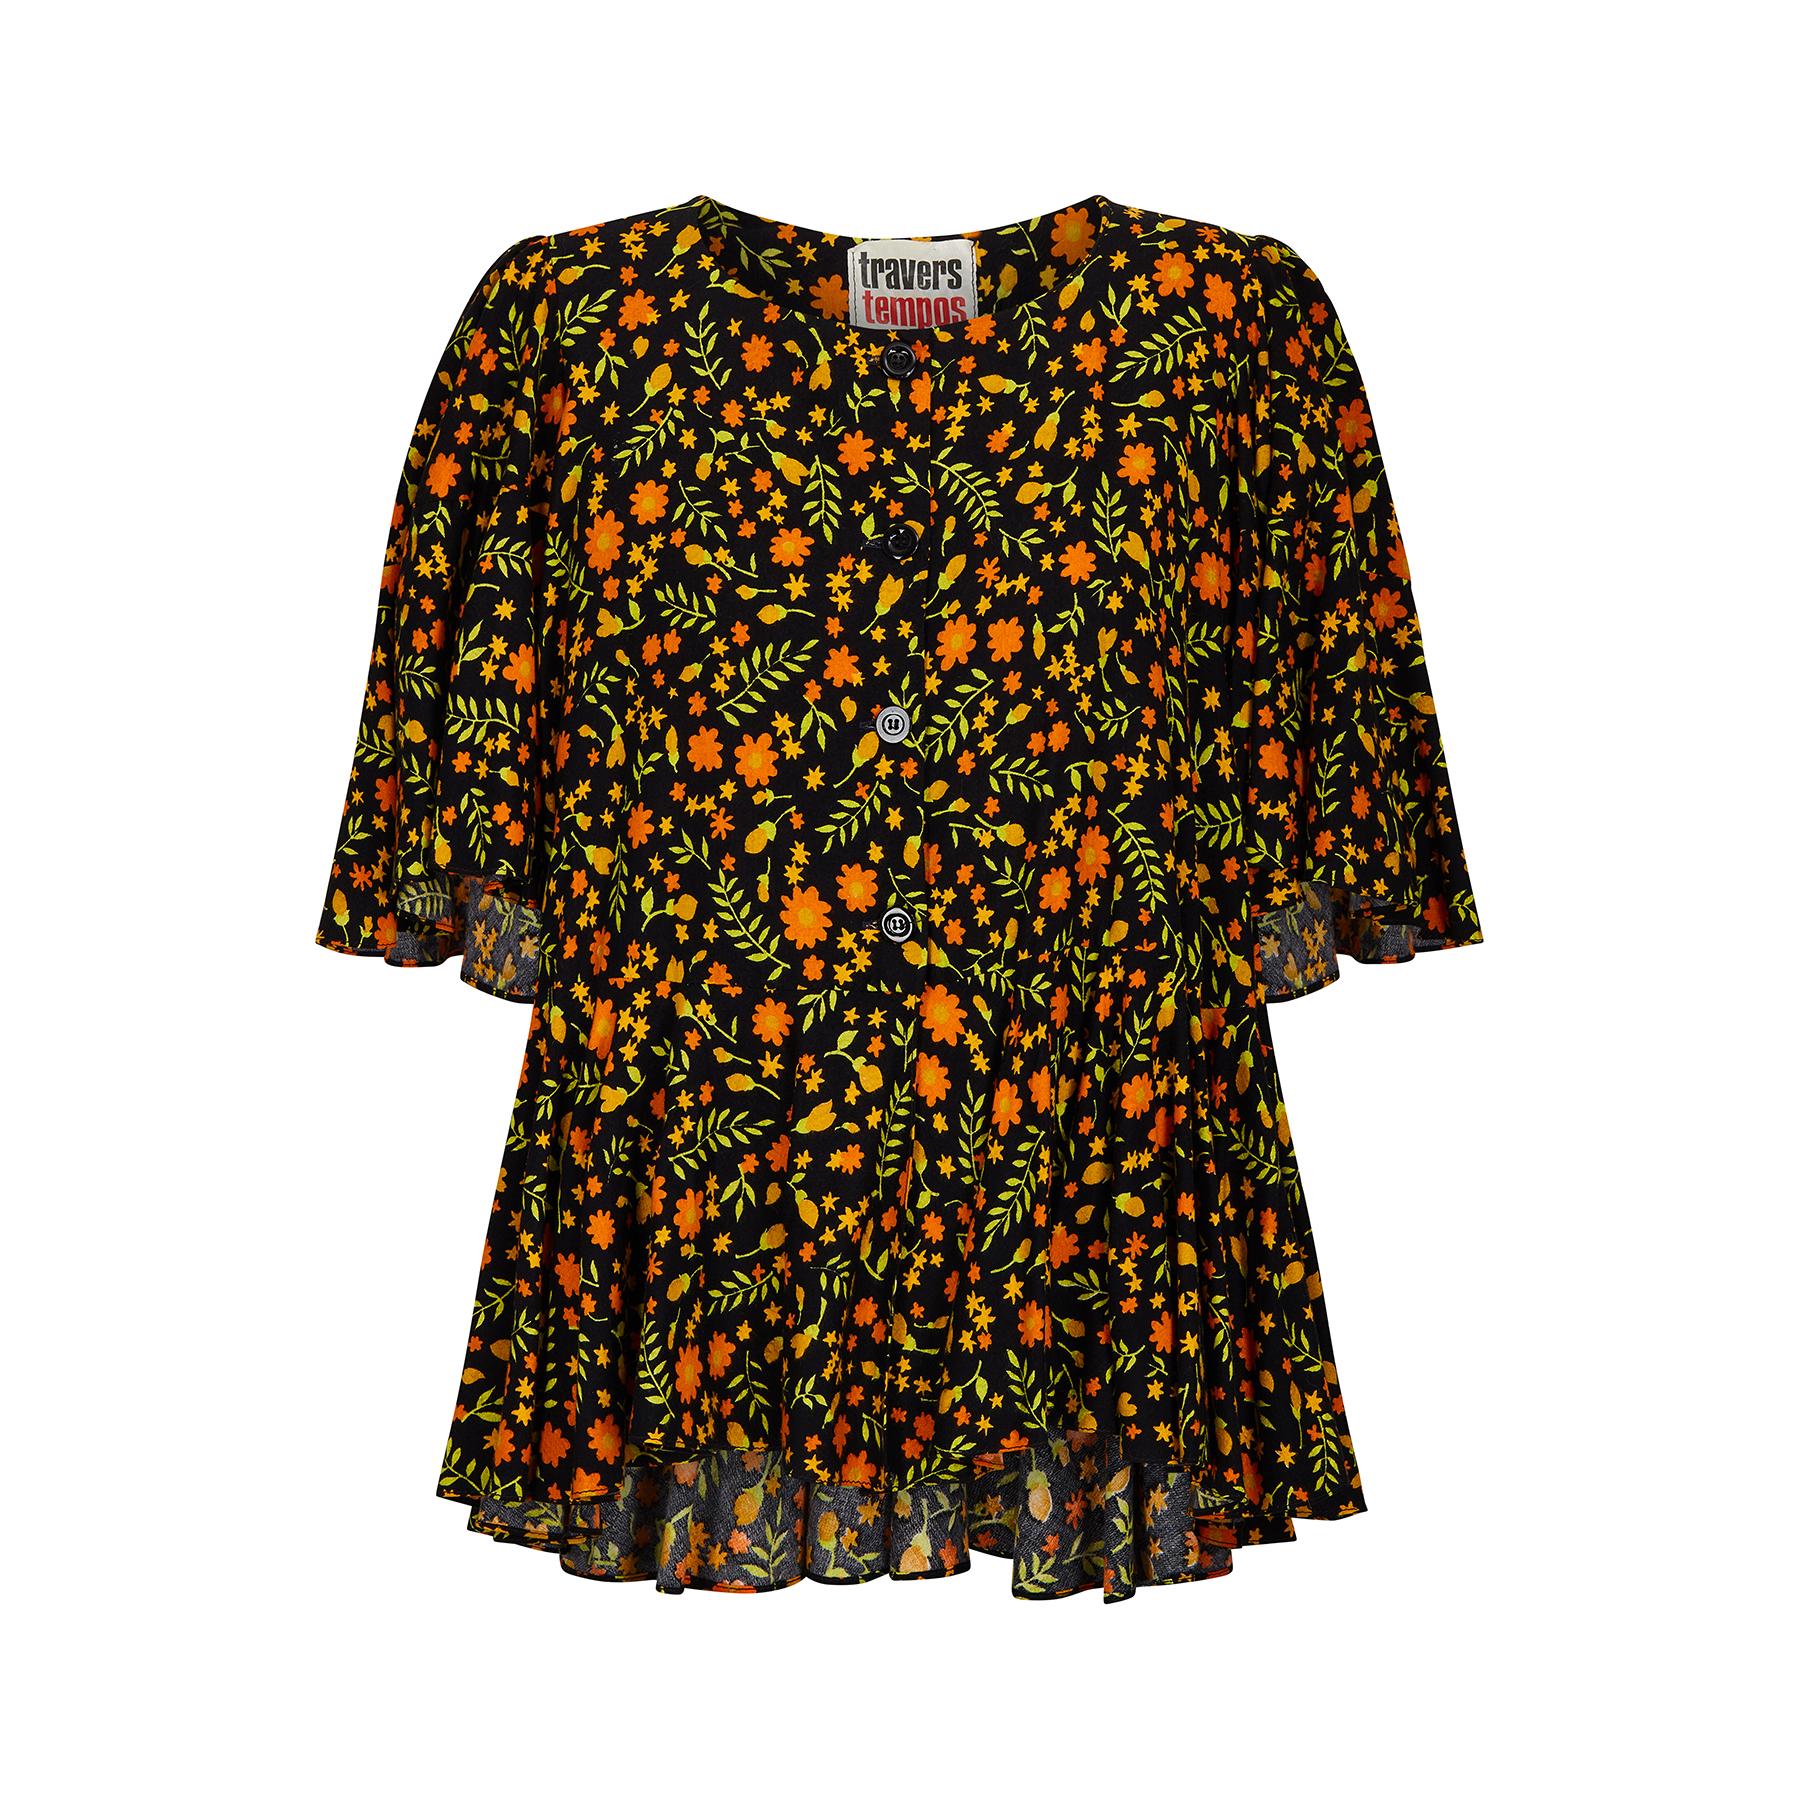 This collectable Travers Tempos top originates from the very late 1960s or early 1970s at the height of the London Fashion scene of the swinging 60s. An oversized style featuring a vibrant, repeat floral print in yellow, orange, green and black and